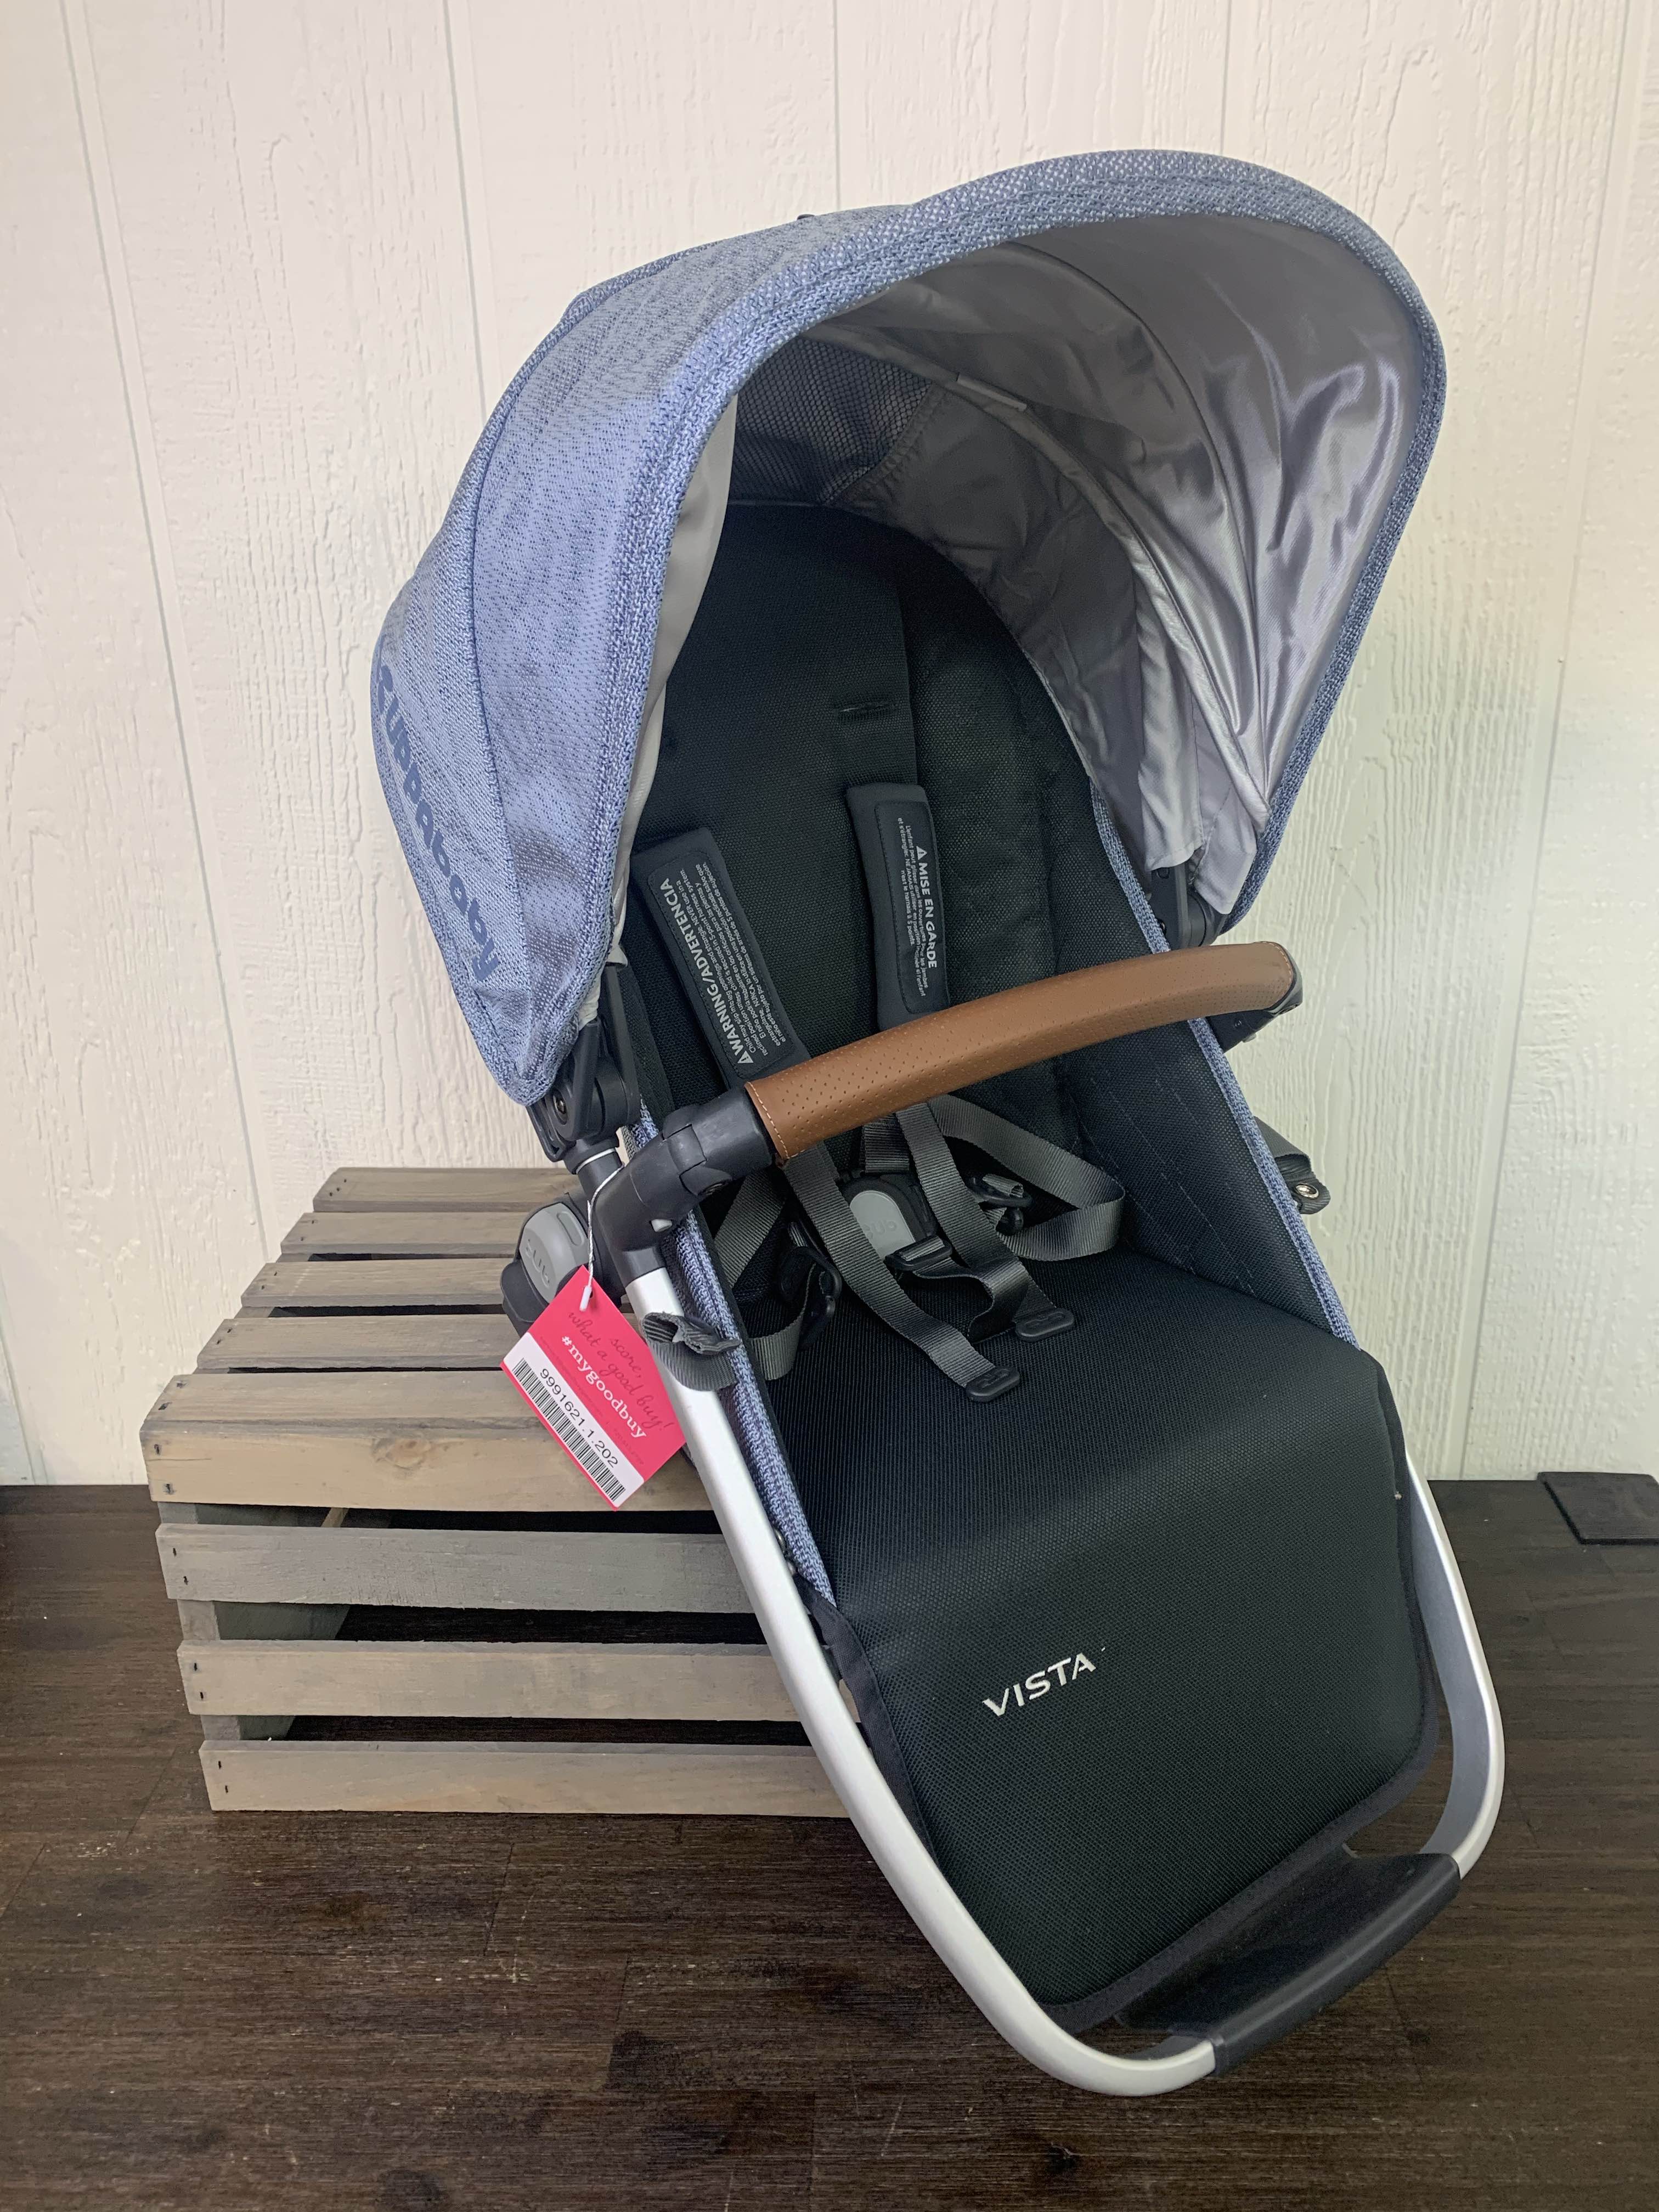 uppababy rumble seat 2015